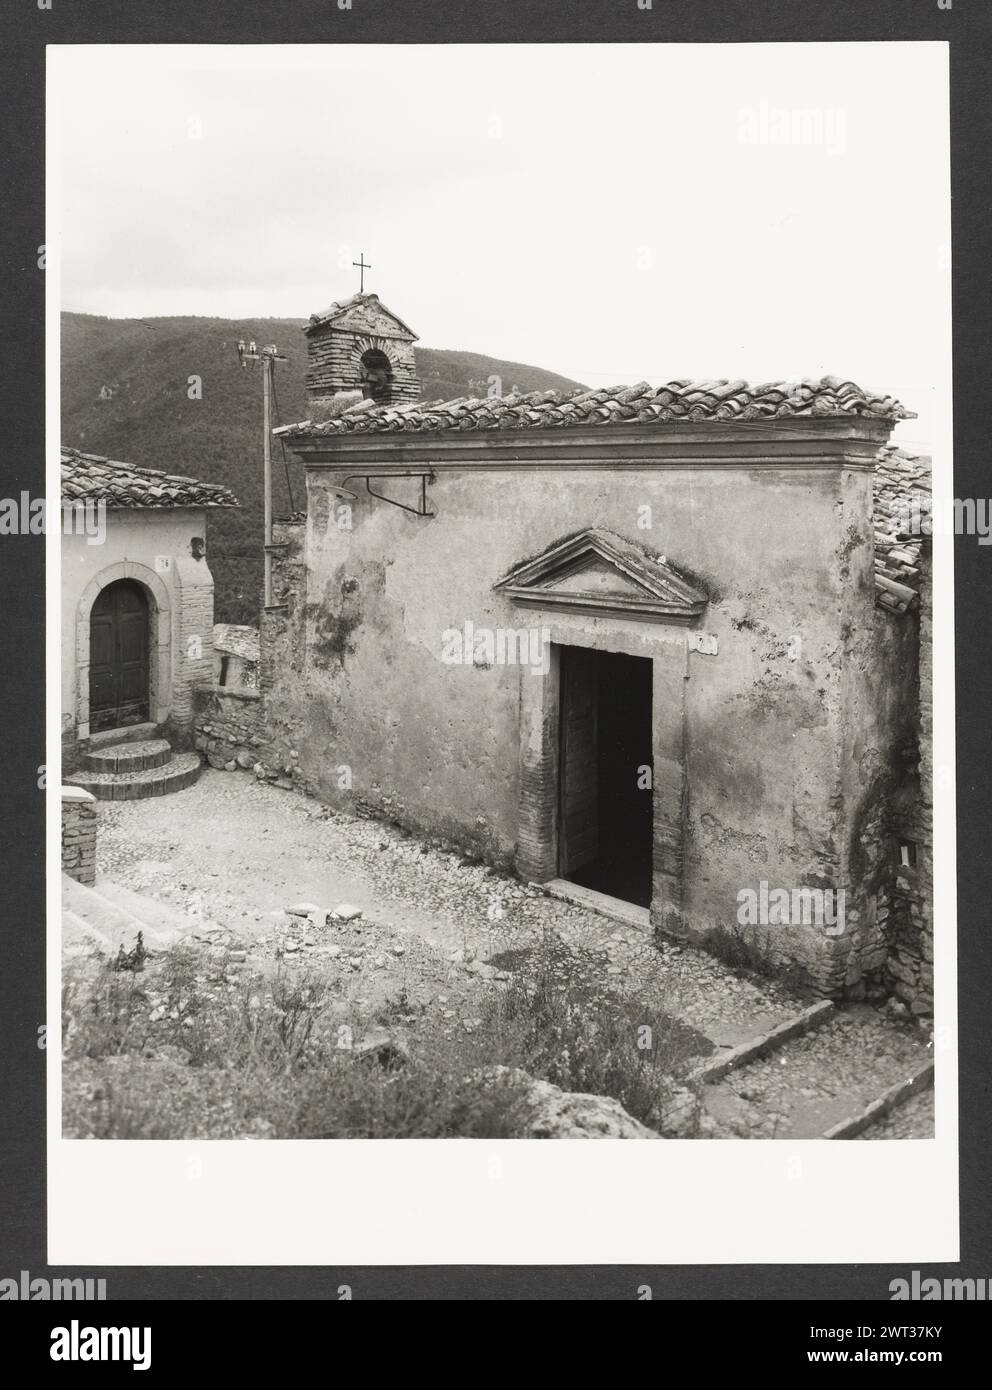 Lazio Rieti Roccantica S. Caterina. Hutzel, Max 1960-1990 Exterior views of the church facade. All interior views of the late gothic frescoes by Pietro Coleberti da Priverno (1430). German-born photographer and scholar Max Hutzel (1911-1988) photographed in Italy from the early 1960s until his death. The result of this project, referred to by Hutzel as Foto Arte Minore, is thorough documentation of art historical development in Italy up to the 18th century, including objects of the Etruscans and the Romans, as well as early Medieval, Romanesque, Gothic, Renaissance and Baroque monuments. Image Stock Photo